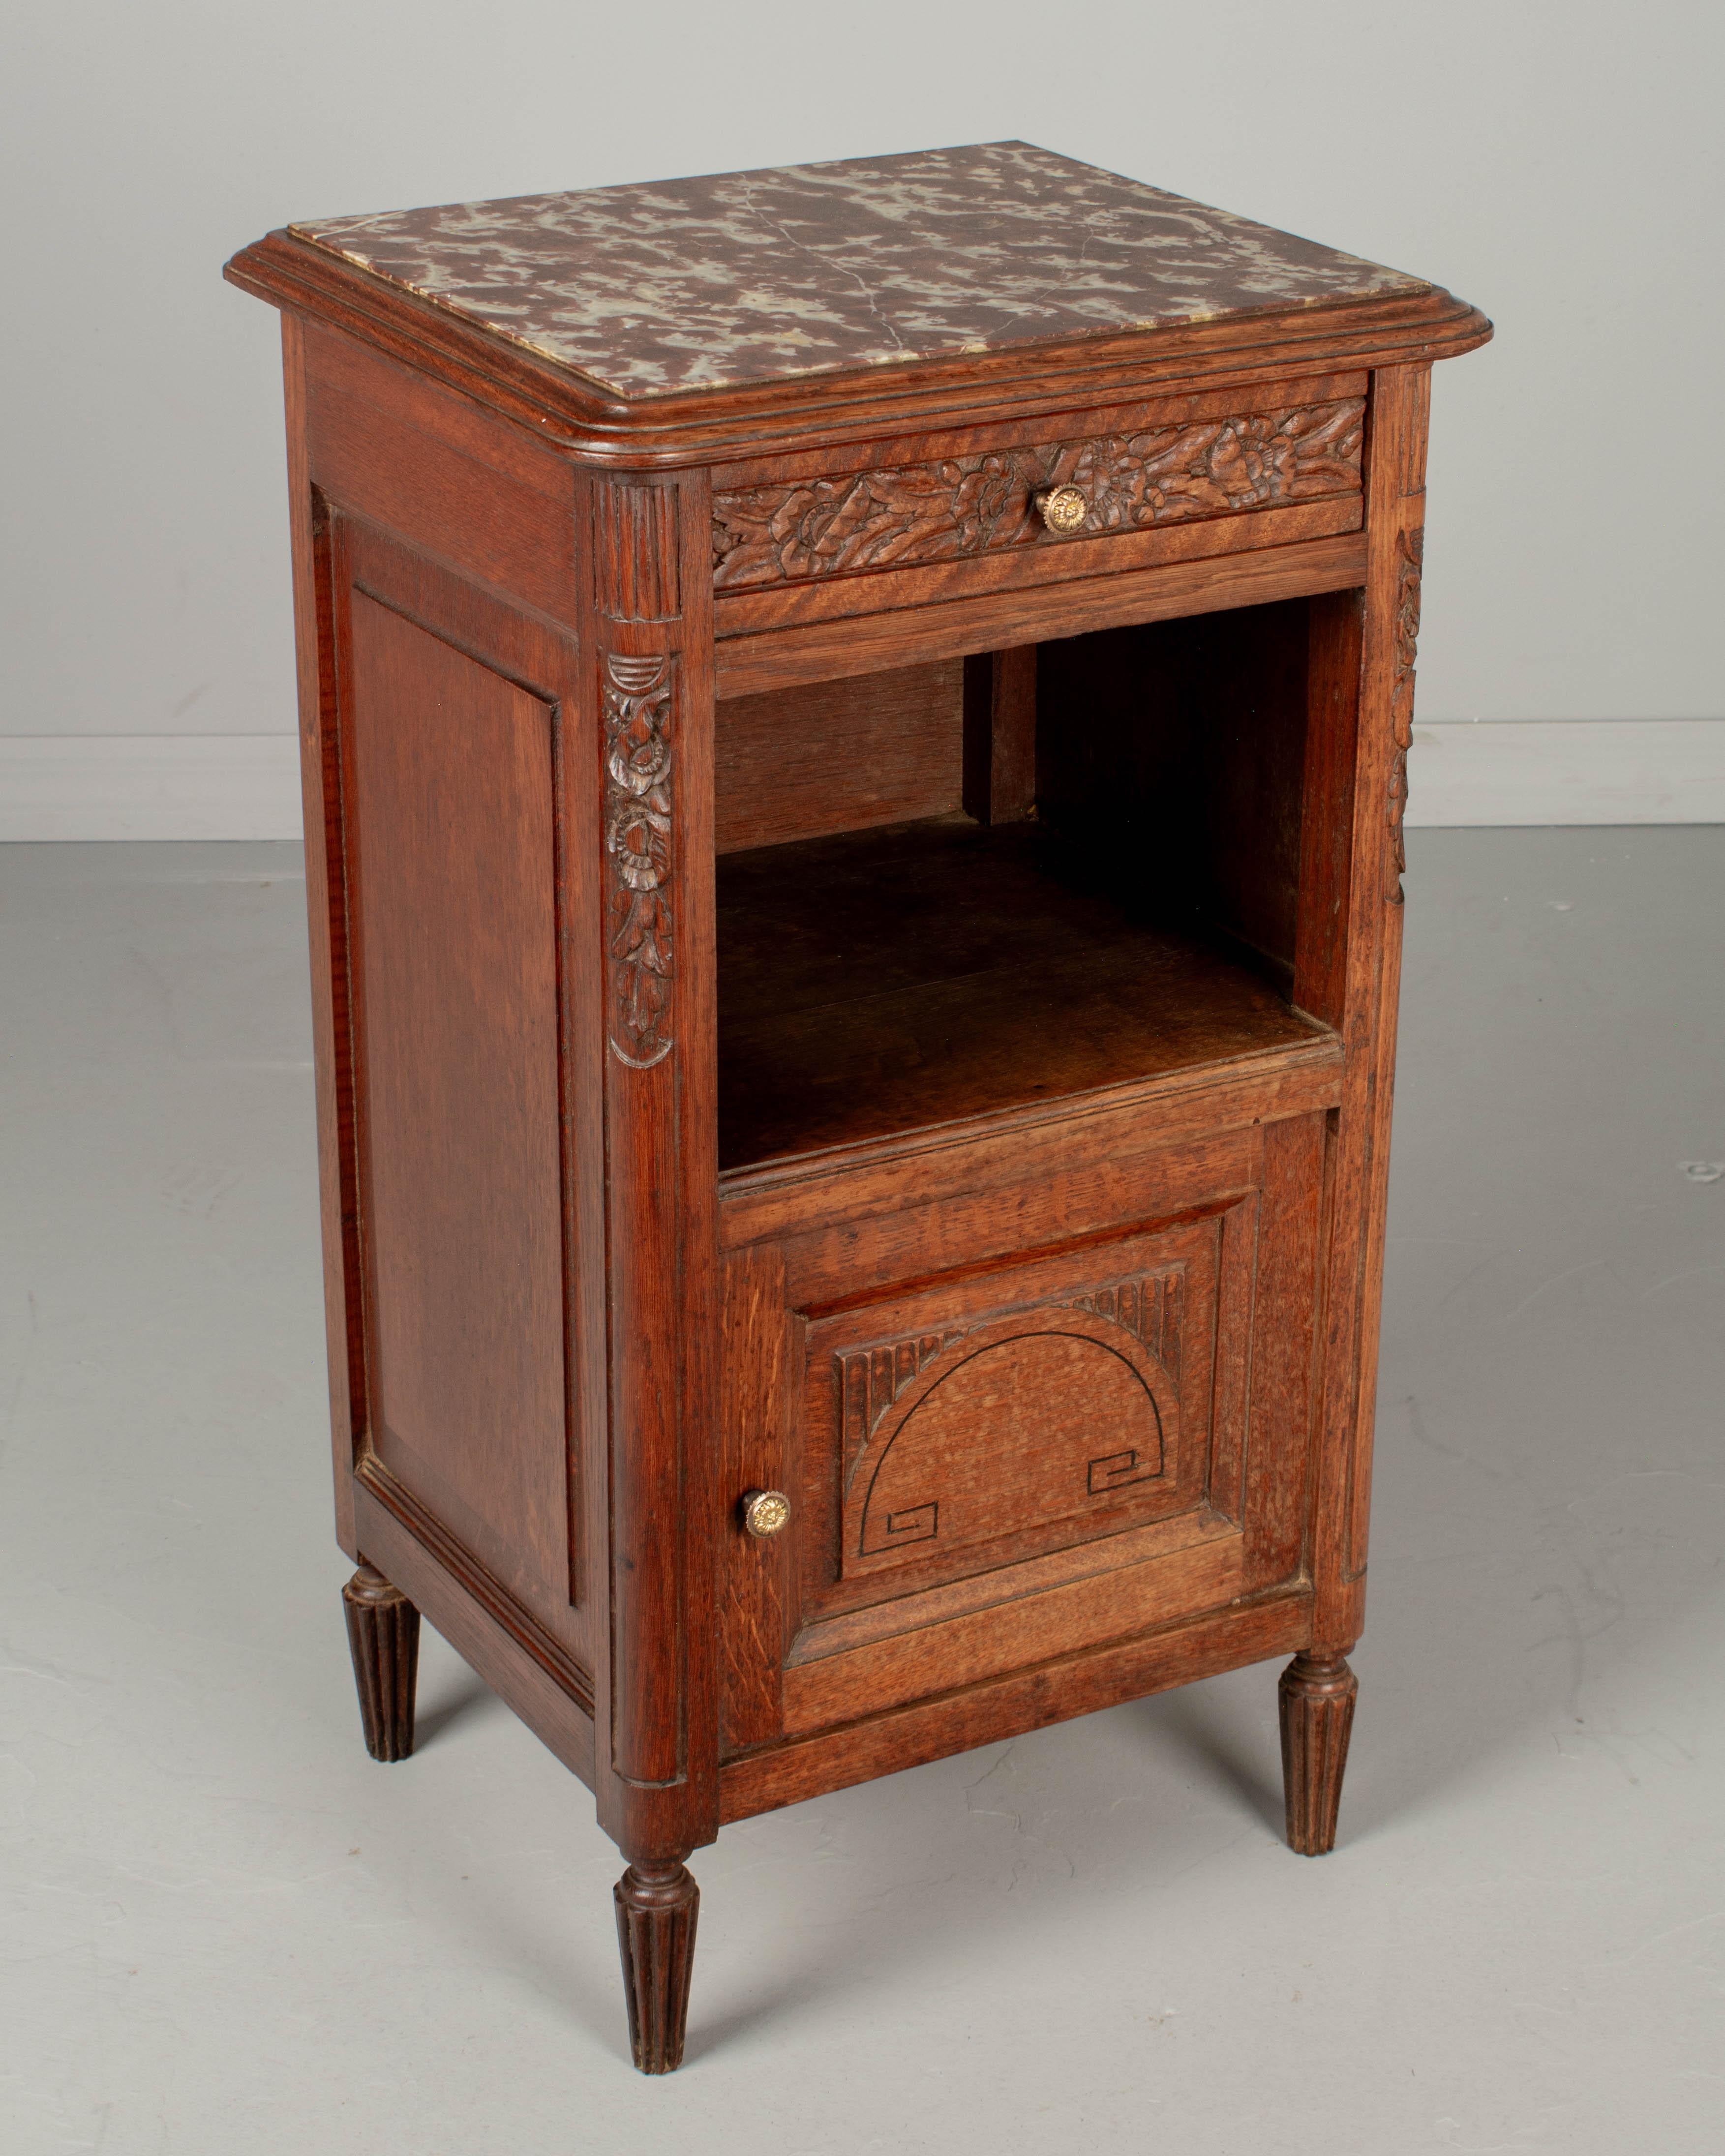 A French Art Deco nightstand made of solid oak, with inset Rouge Royal marble top. Dovetailed drawer with hand-carved stylized floral details. Open niche above a cabinet door opening to a porcelain lined interior. Cast brass knobs. Turned tapered